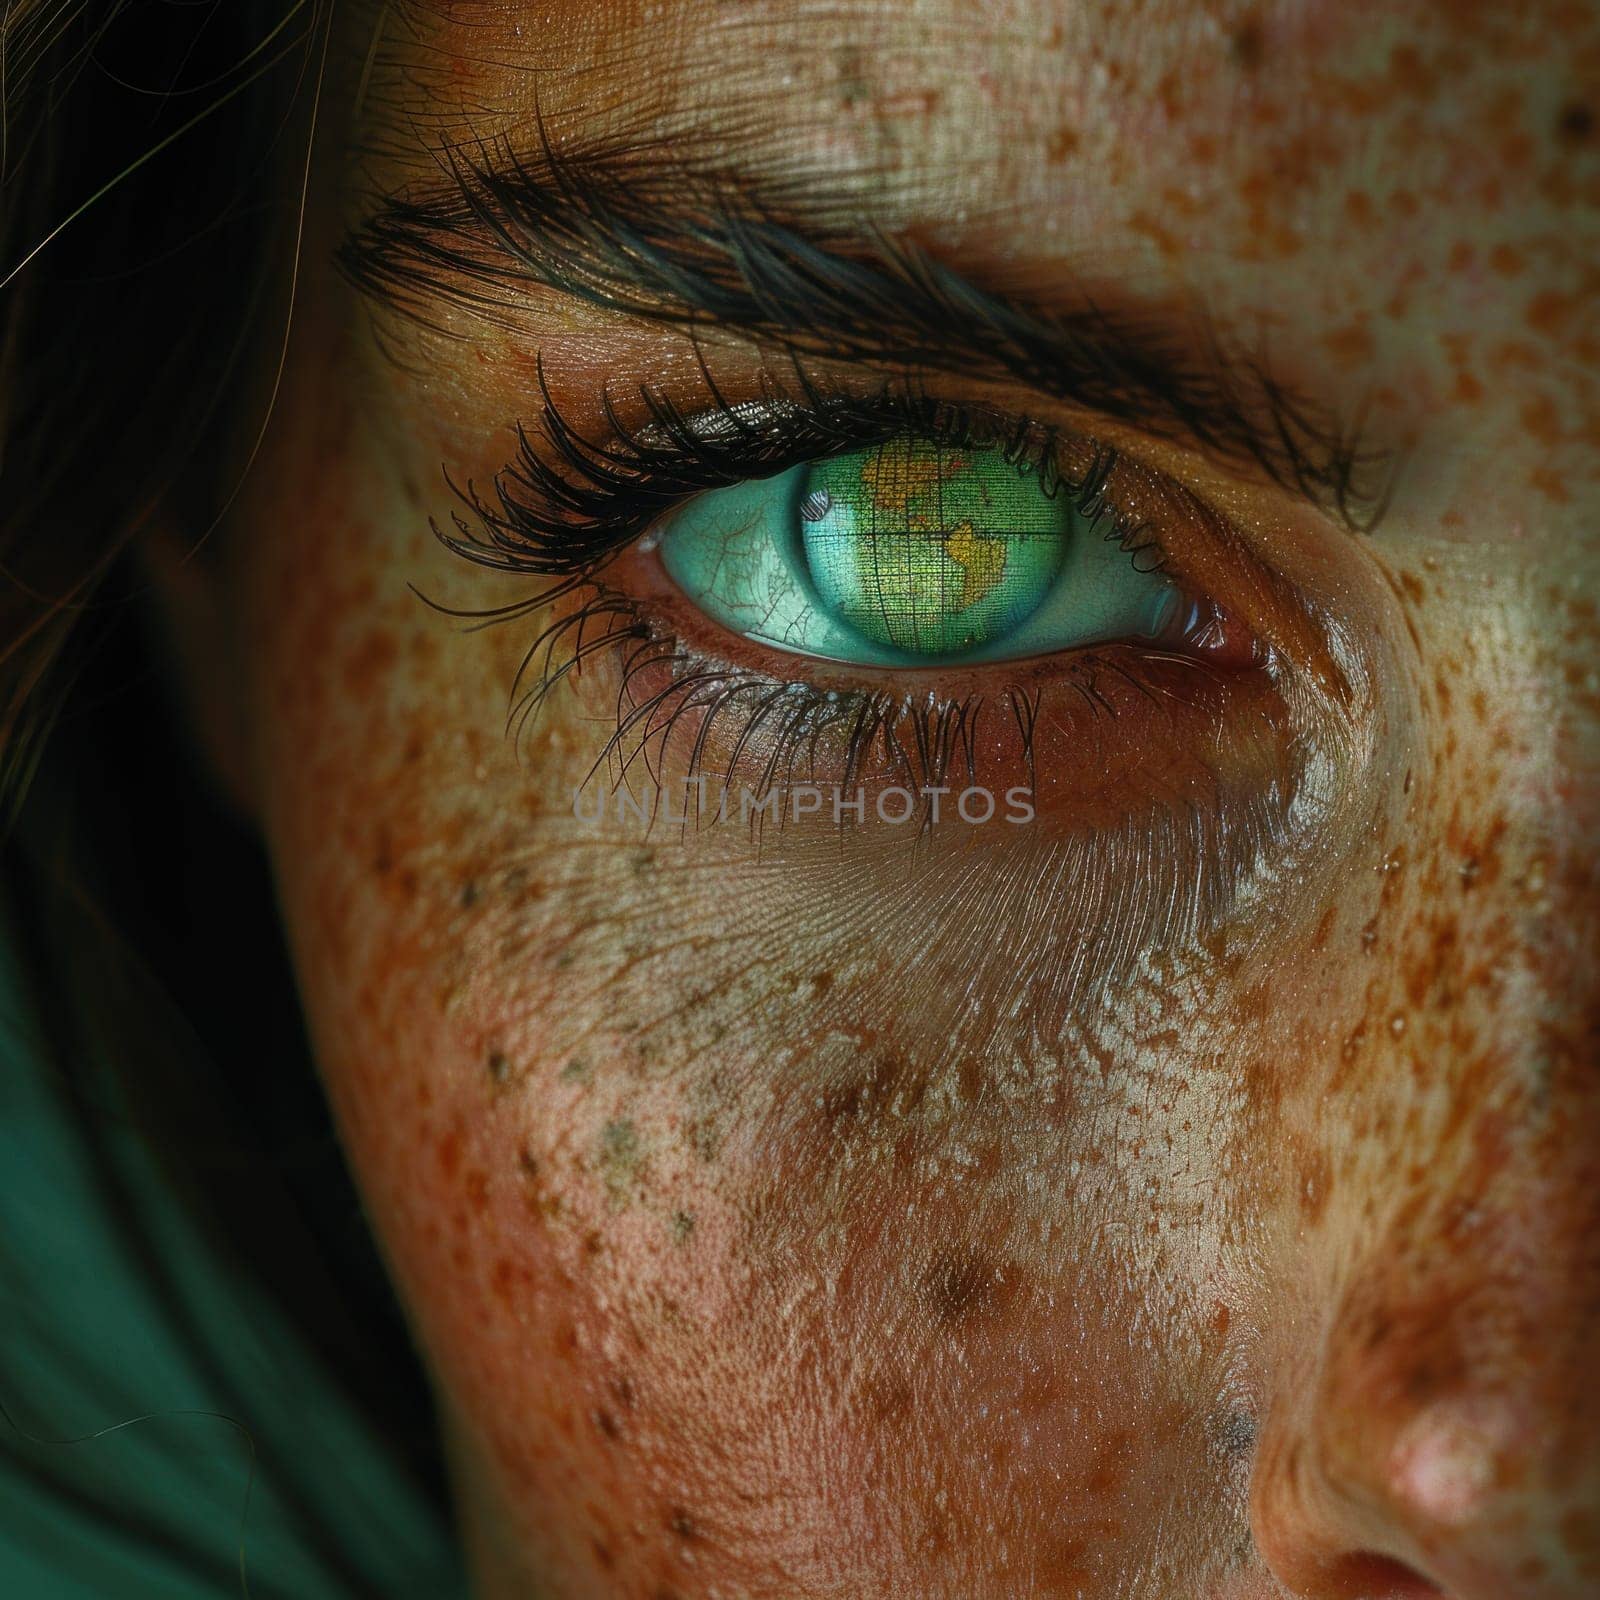 Detailed view of a womans face showing prominent freckles.